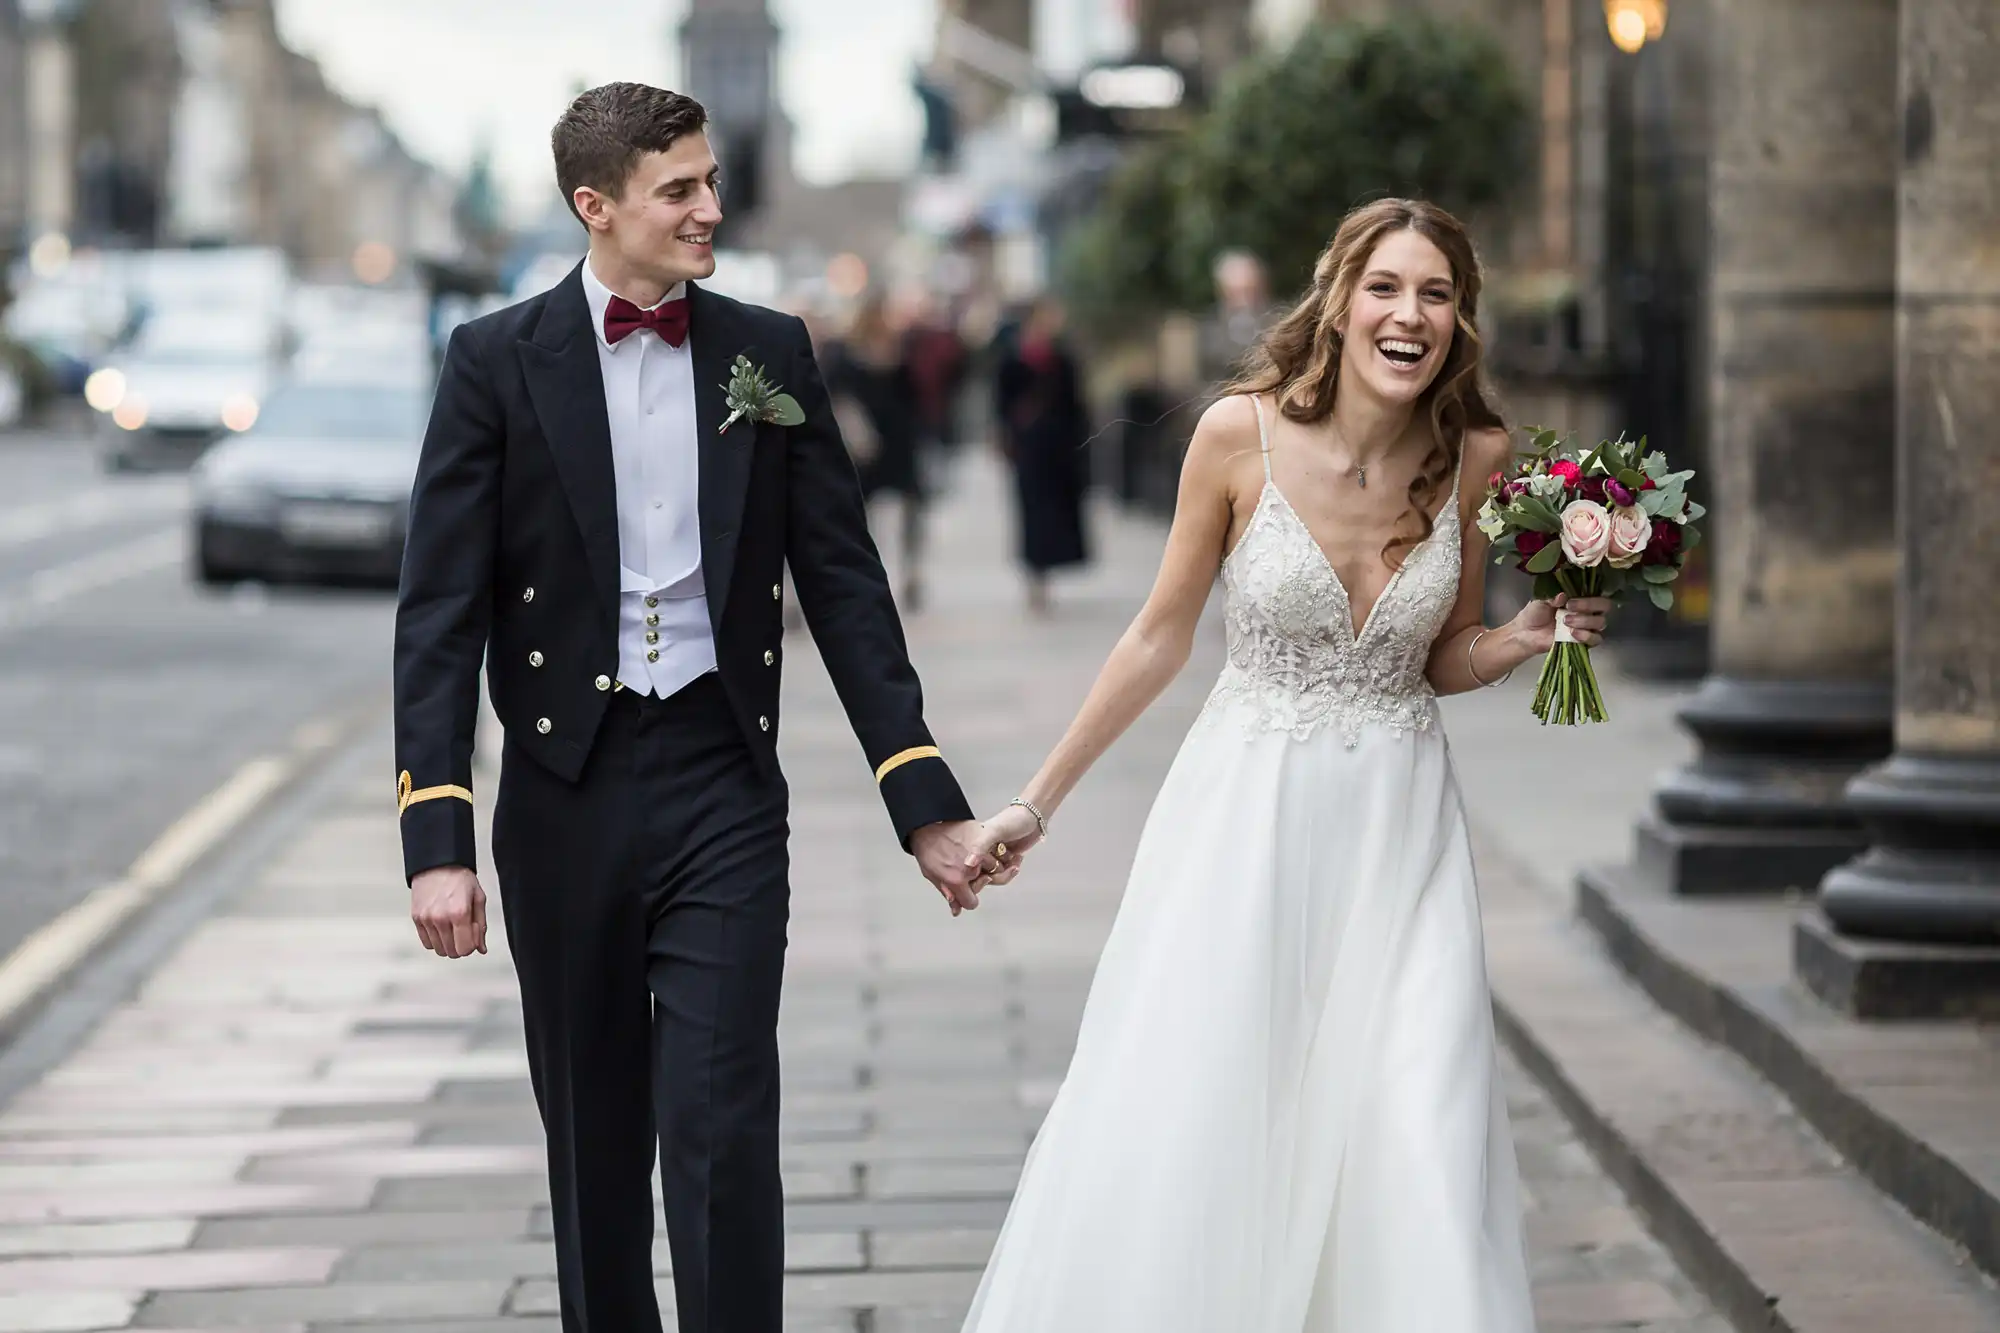 A bride in a white gown and a groom in a black tuxedo walk hand in hand on a city sidewalk, both smiling.